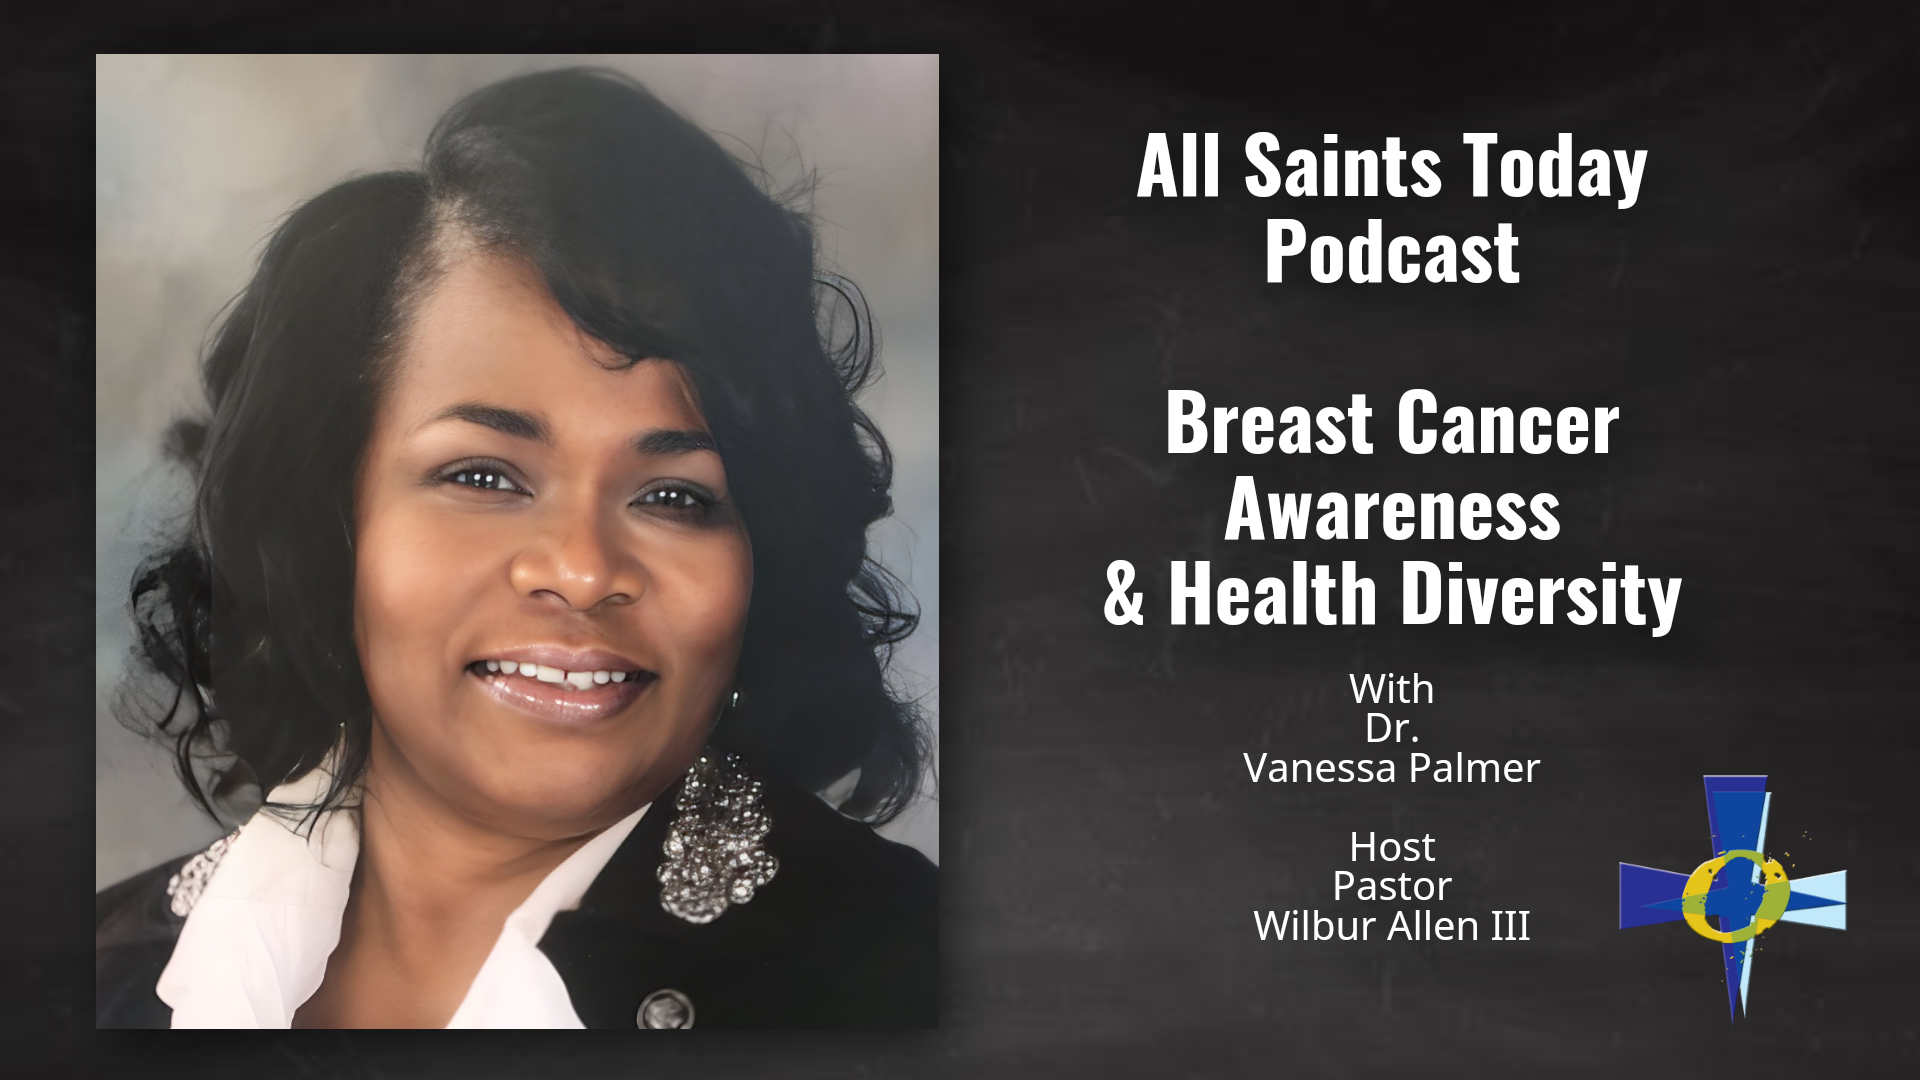 All Saints Today Podcast - Breast Cancer Awareness & Health Diversity